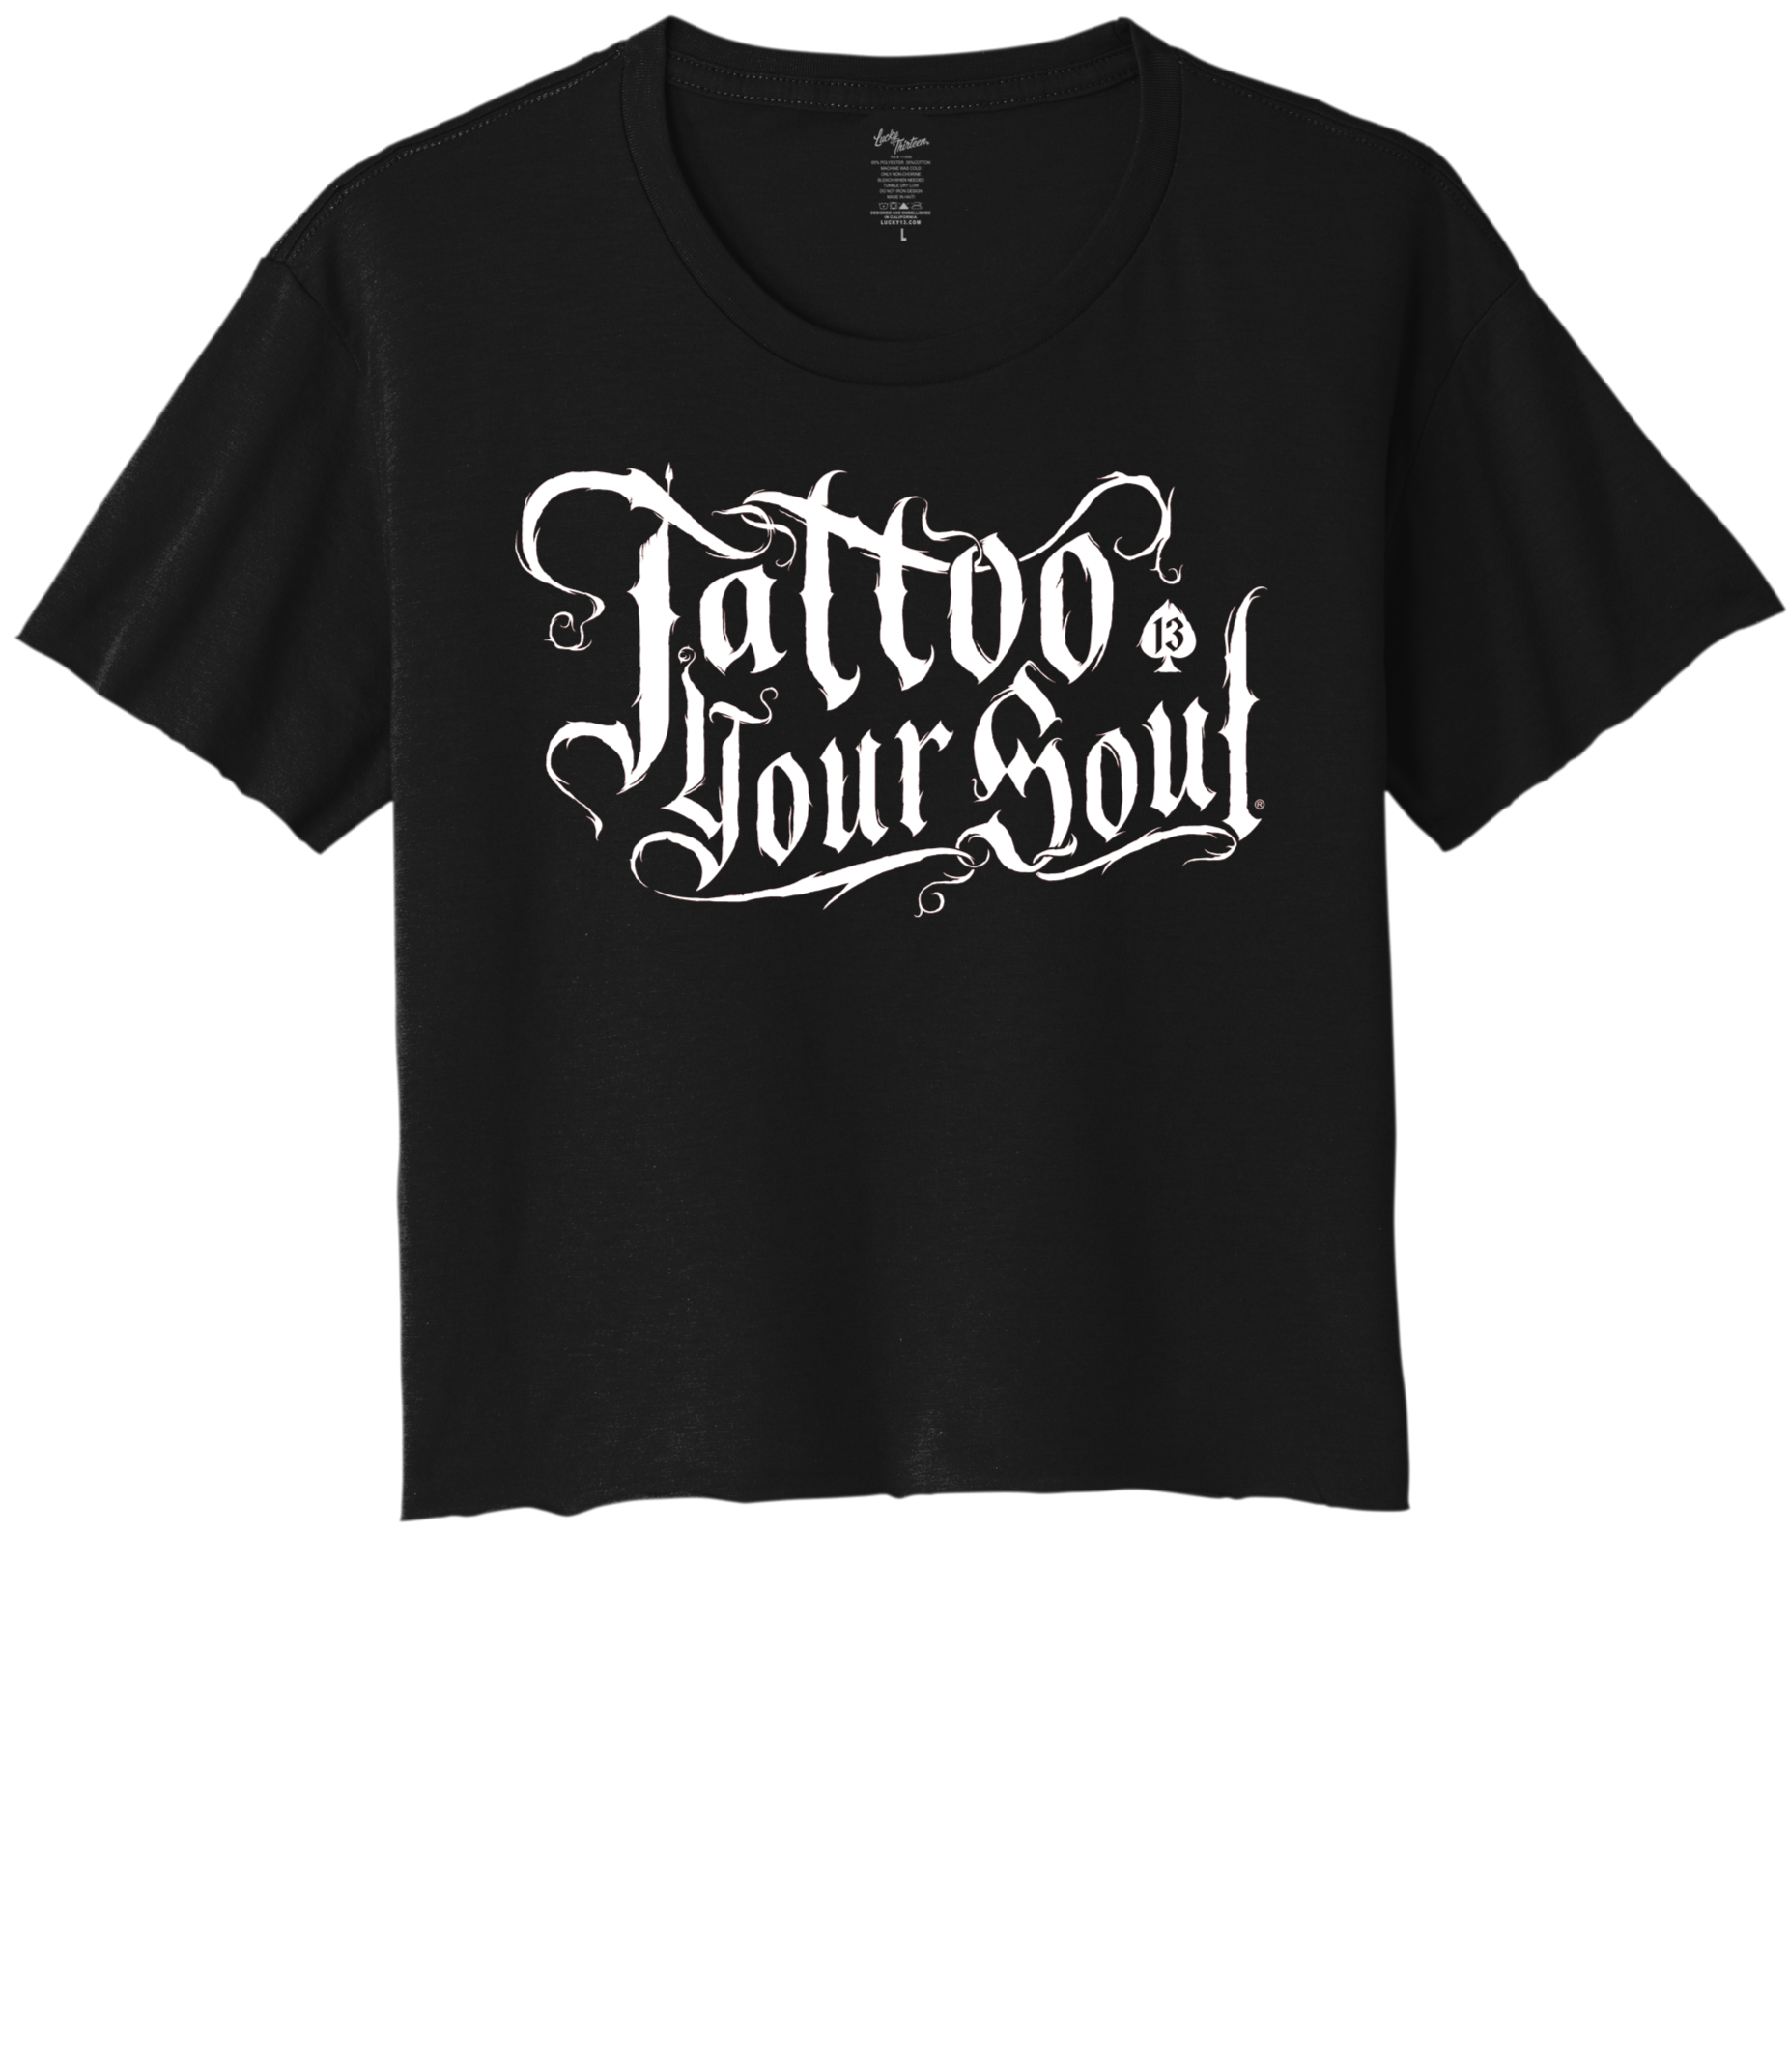 TATTOO YOUR SOUL Women's Crop Top Tee - BLACK/WHITE **NEW**